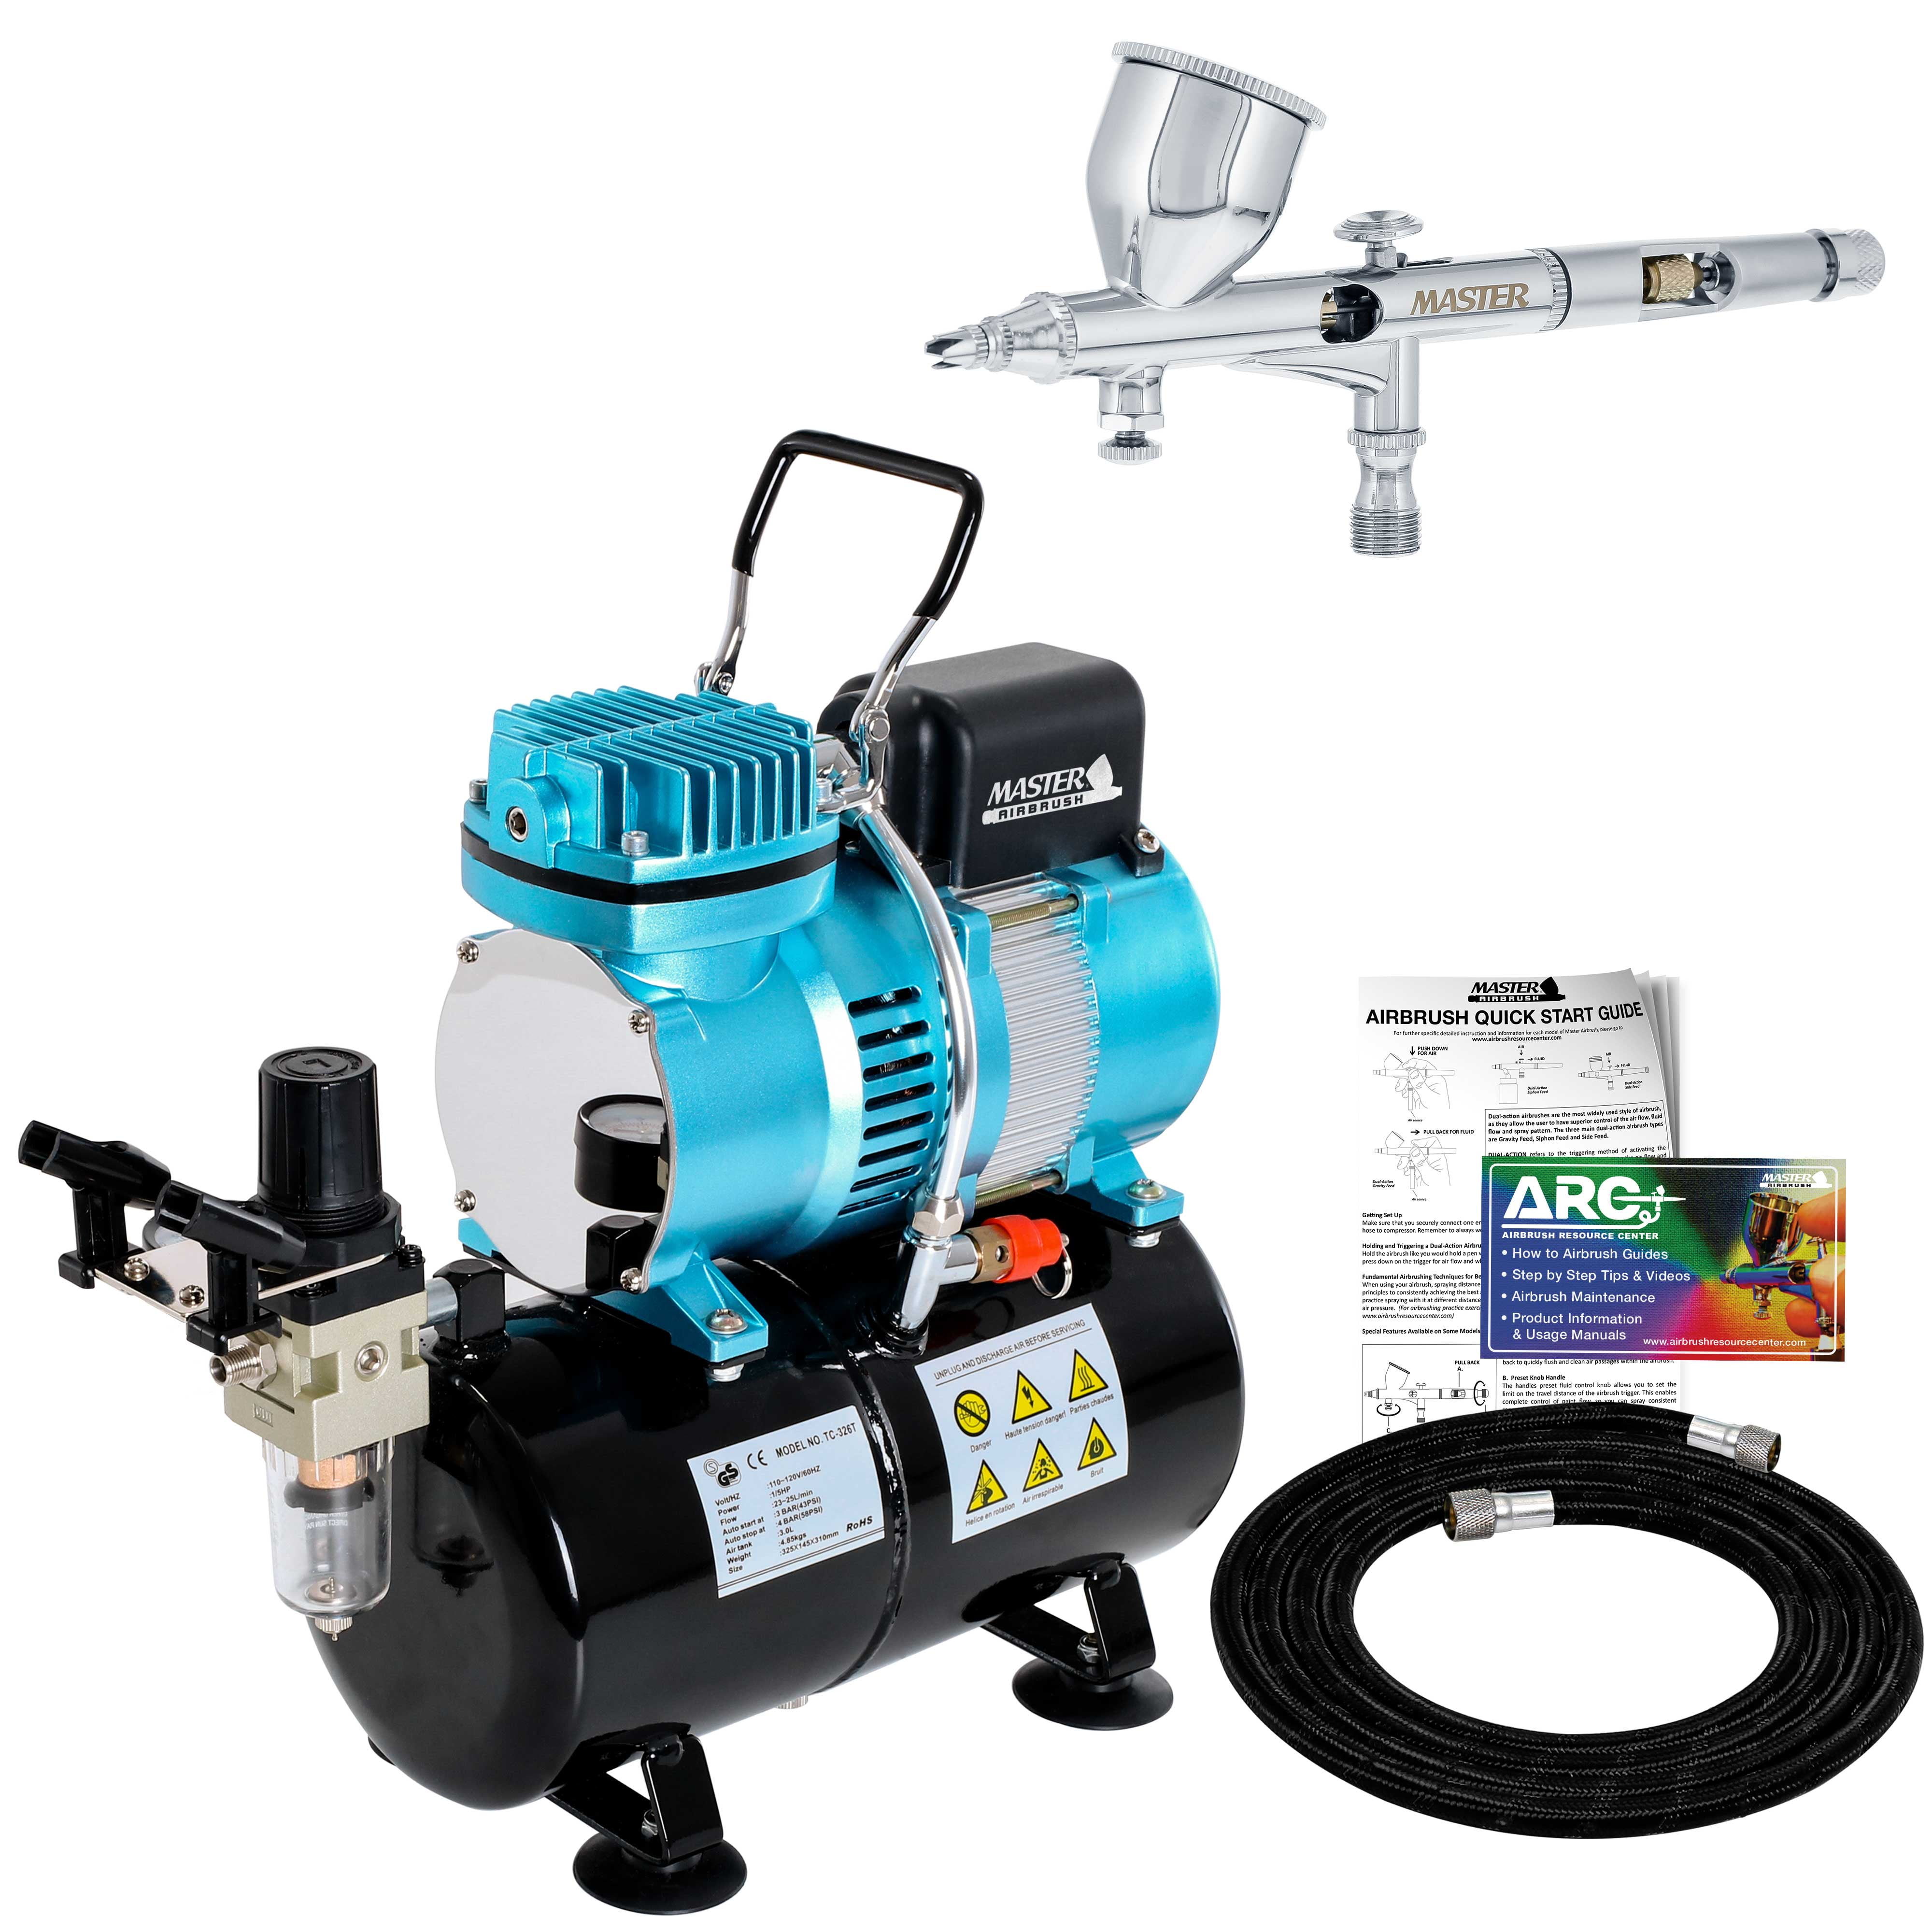 Master Airbrush Cool Runner II Dual Fan Air Compressor System Kit with  Master Elite Plus Elite Level Performance Airbrush Set, Case, Dual-Action,  0.3mm Tip, 2 Cups, 6 Color Acrylic Paint Artist Set 